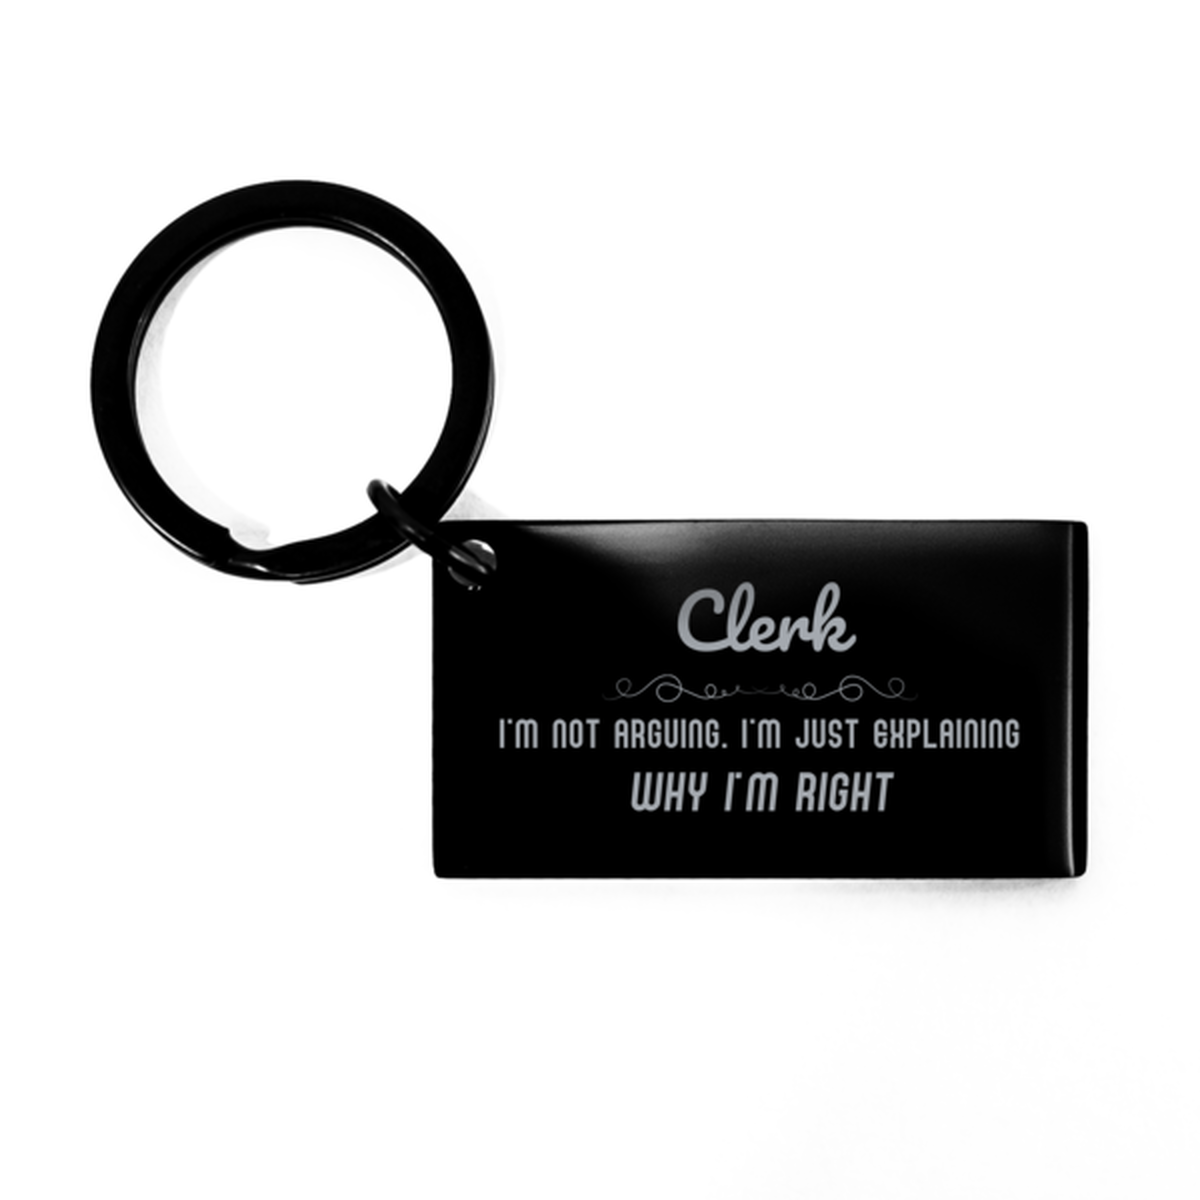 Clerk I'm not Arguing. I'm Just Explaining Why I'm RIGHT Keychain, Funny Saying Quote Clerk Gifts For Clerk Graduation Birthday Christmas Gifts for Men Women Coworker